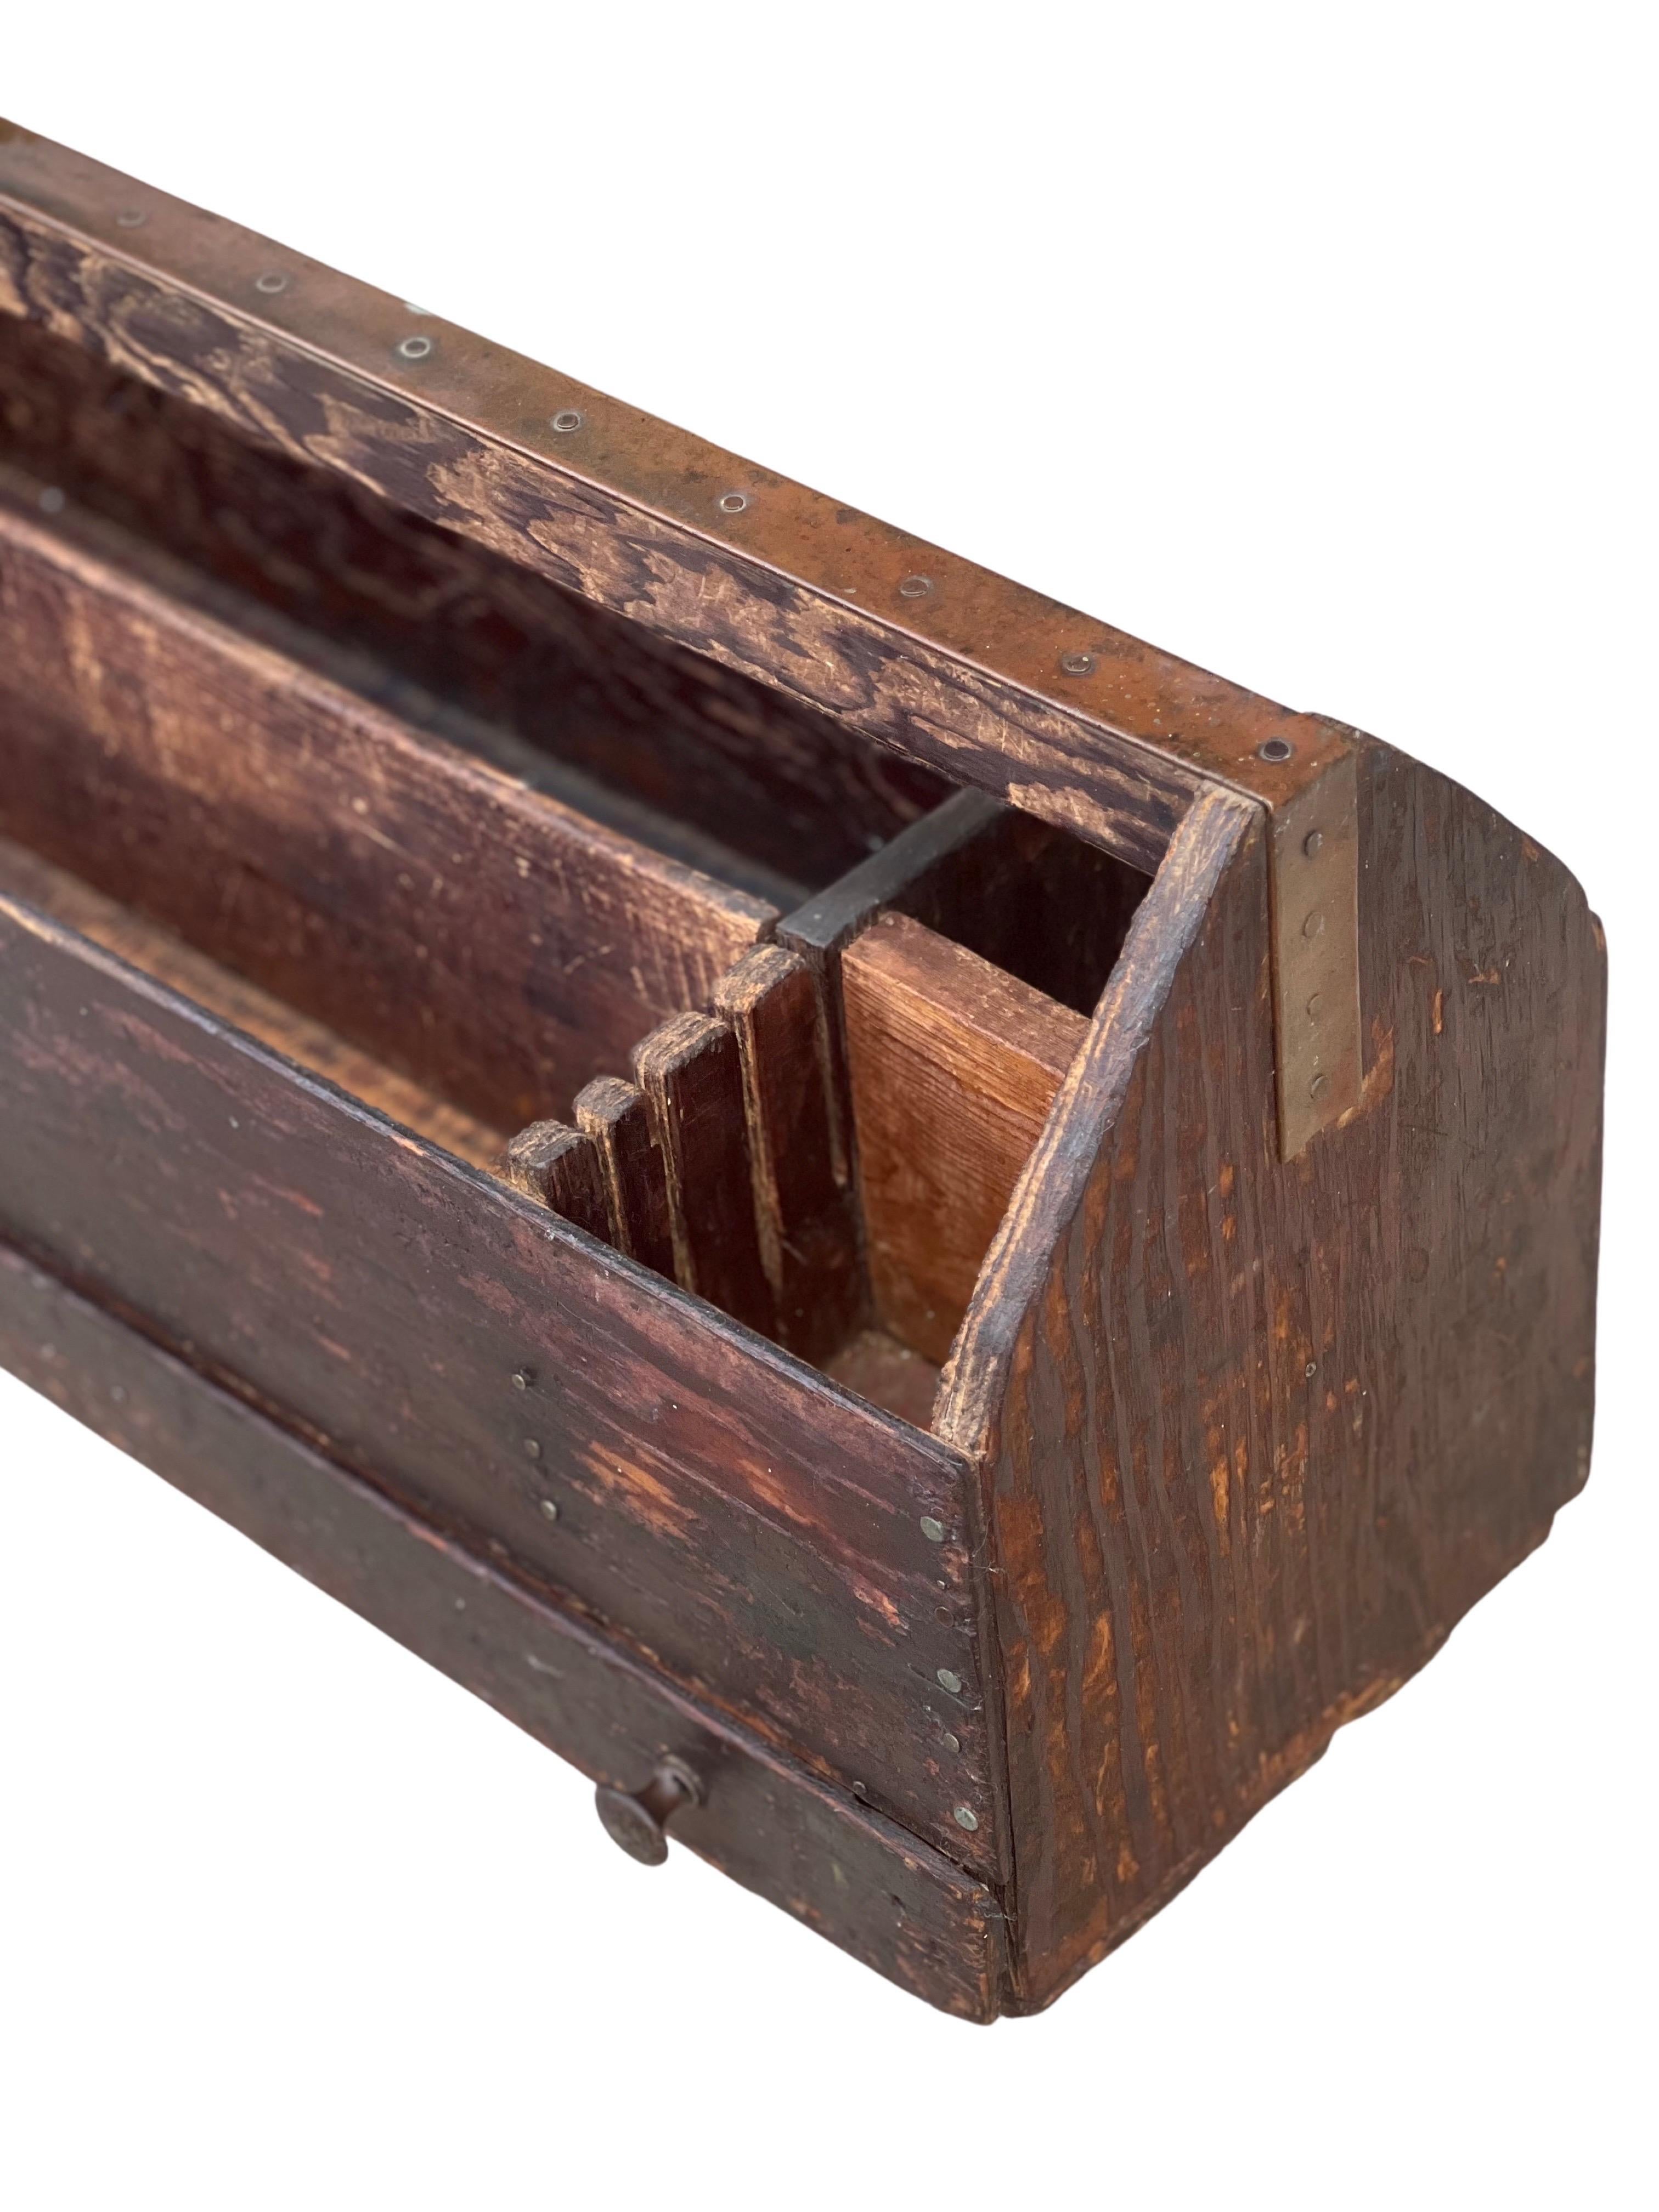 Antique Handcrafted Primitive Pine Tool Carrier or All-Purpose Caddy with Drawer For Sale 5